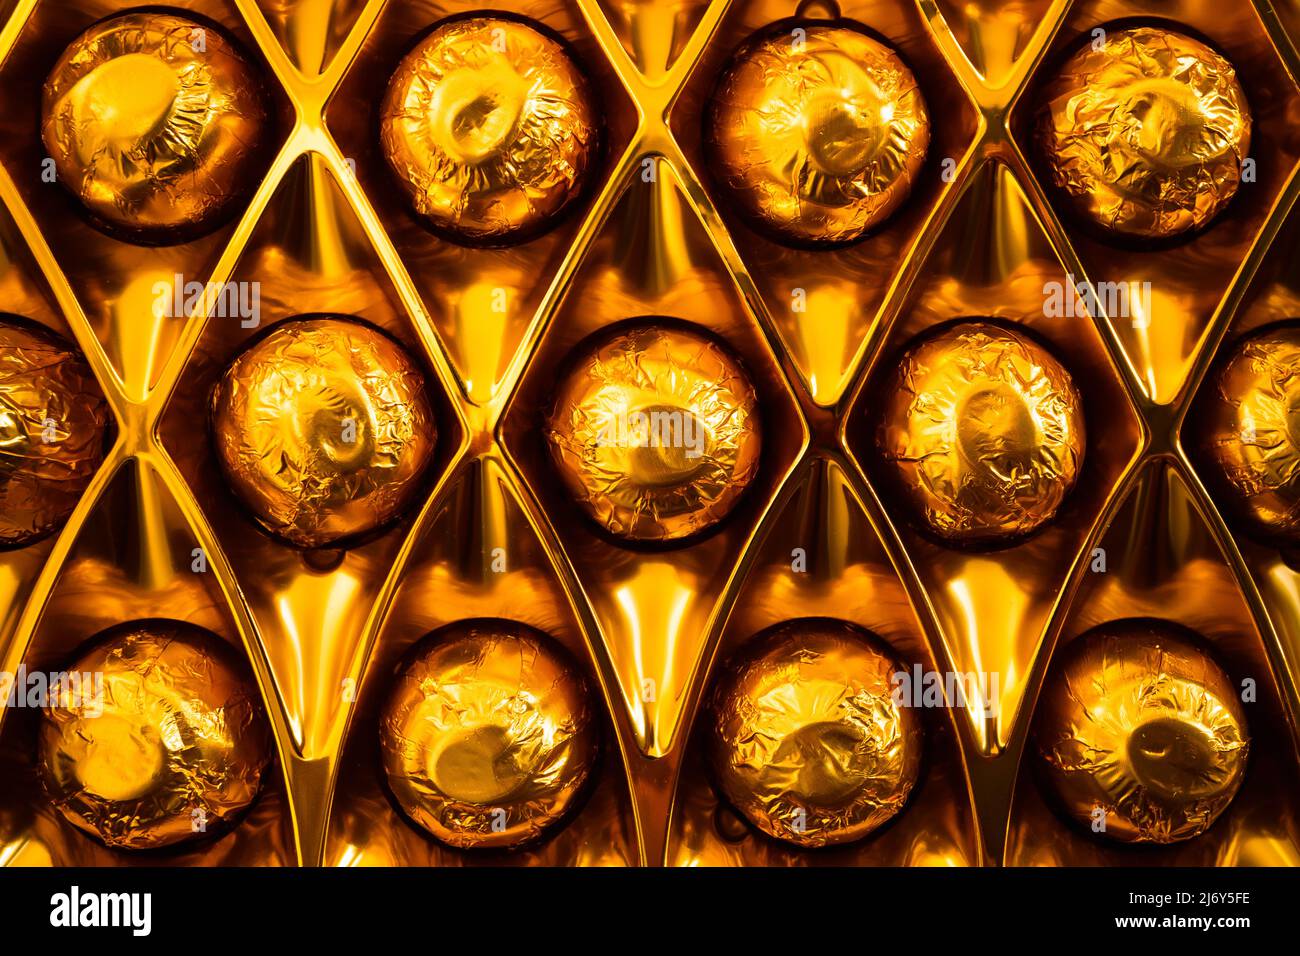 Close up of chocolate bonbons wrapped in gold foil in their box Stock Photo